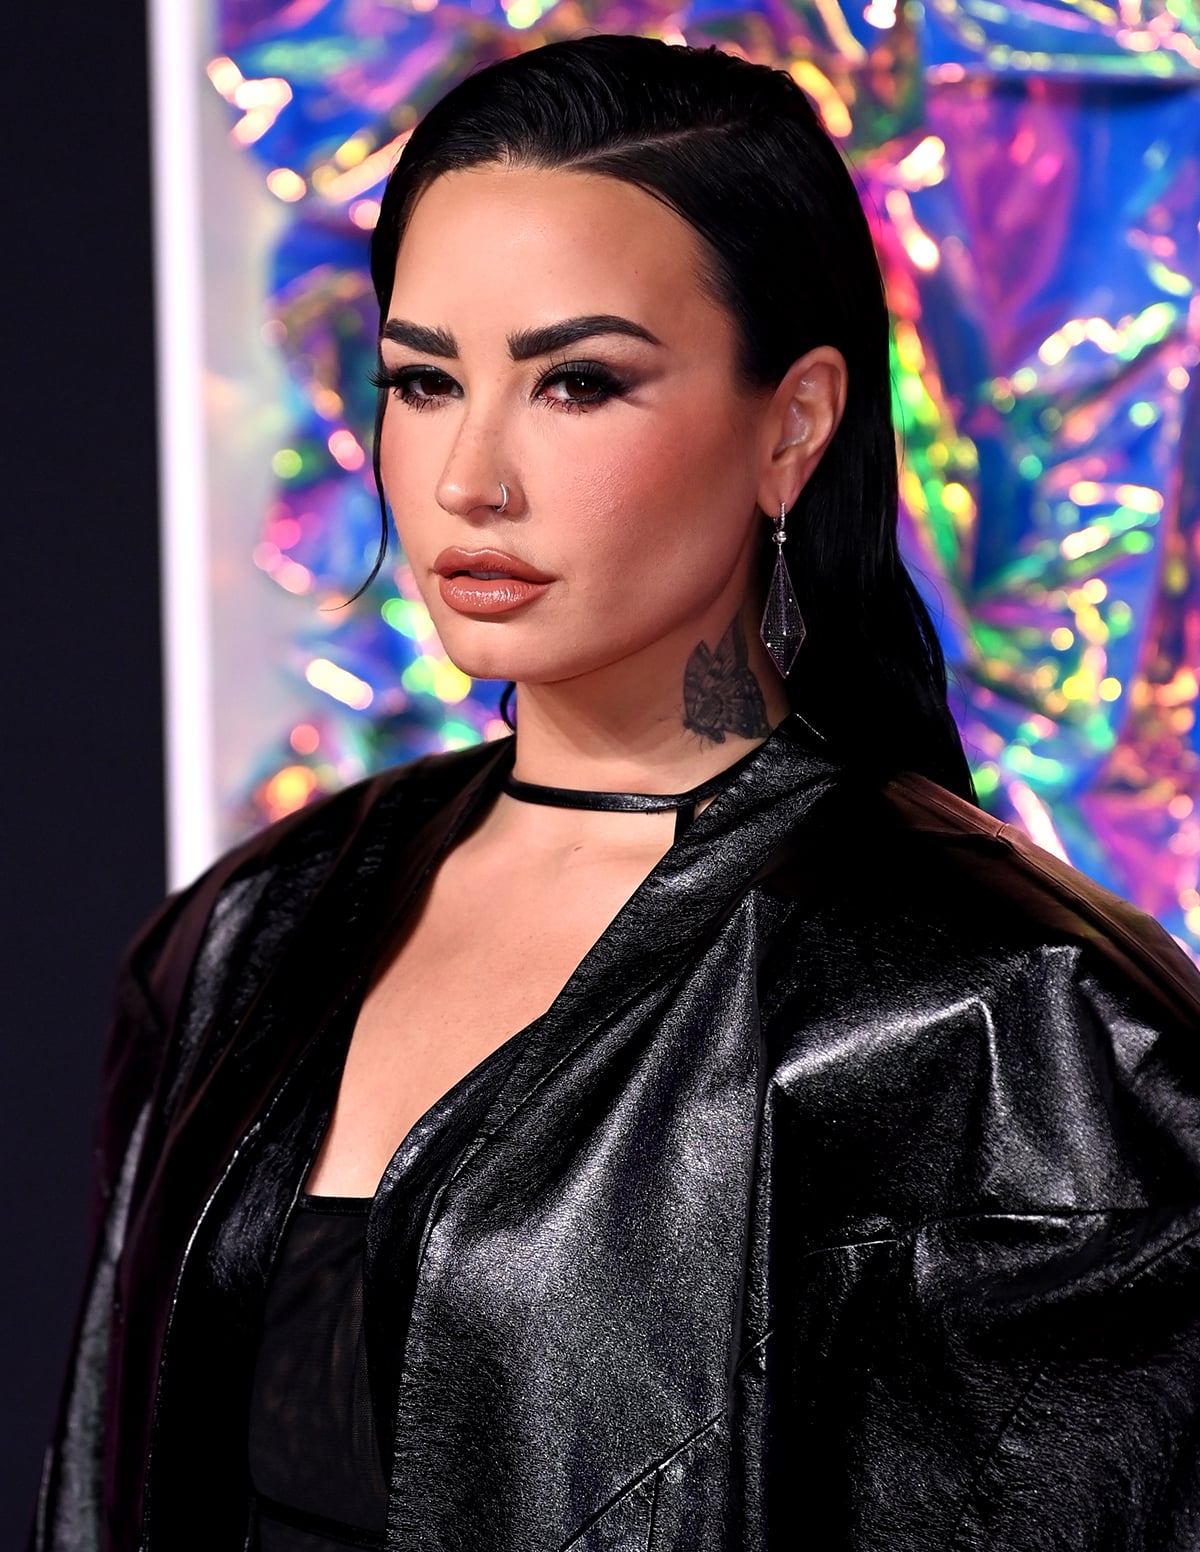 Demi Lovato completes her gothic, rock-chic look with sleek tresses, smokey eyes, and nude lipstick